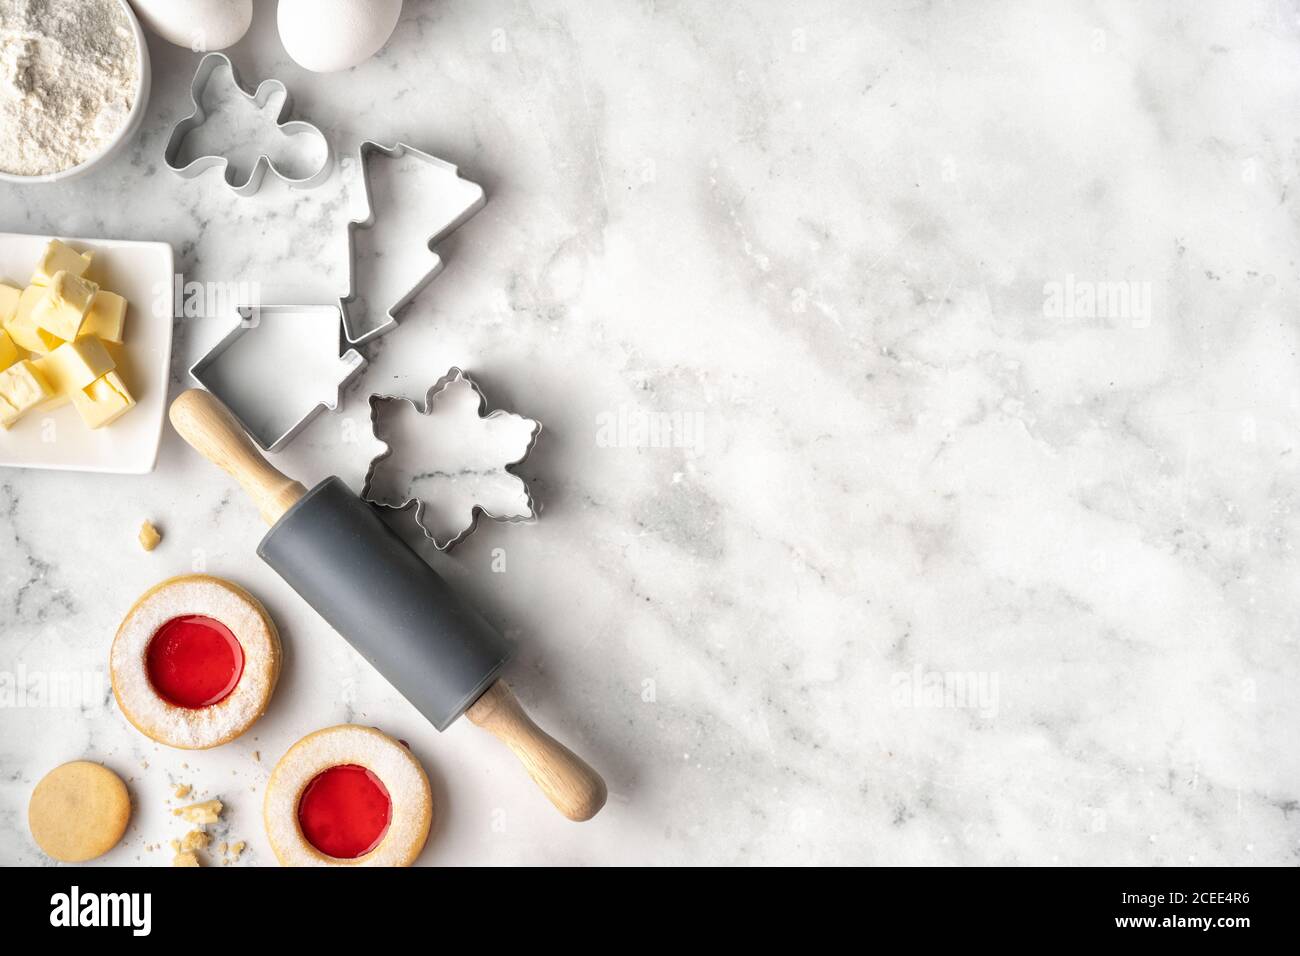 https://c8.alamy.com/comp/2CEE4R6/christmas-baking-background-with-ingredients-for-making-cookies-on-white-marmor-background-2CEE4R6.jpg